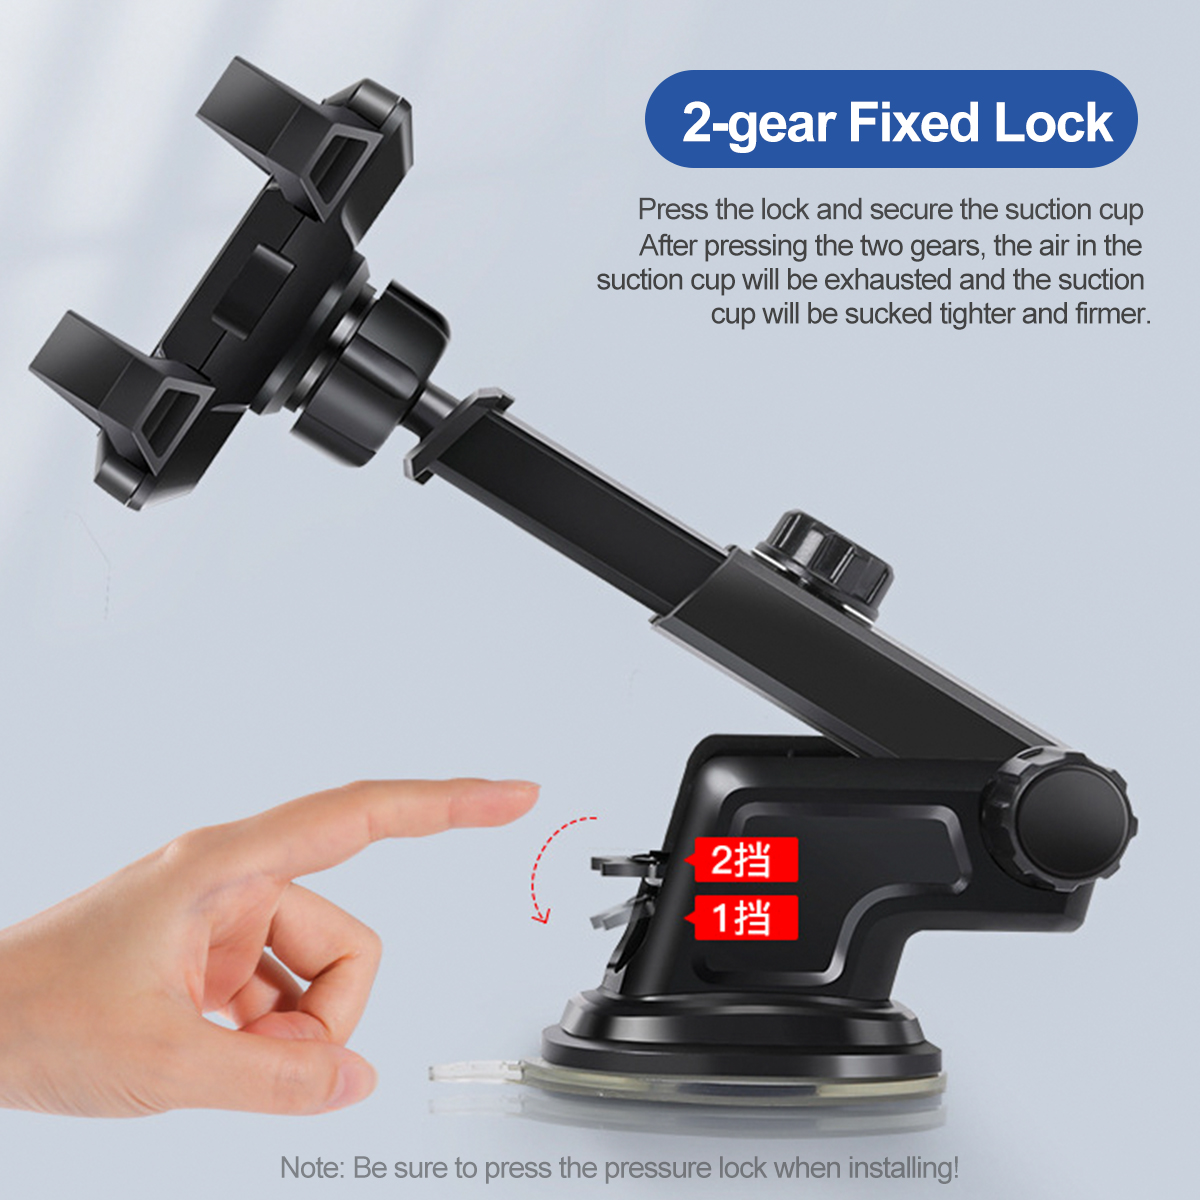 Universal-2-Gear-Fixed-Lock-17cm-Retractable-Arm-Car-Dashboard-Windshield-Mobile-Phone-Mount-Holder--1869563-2